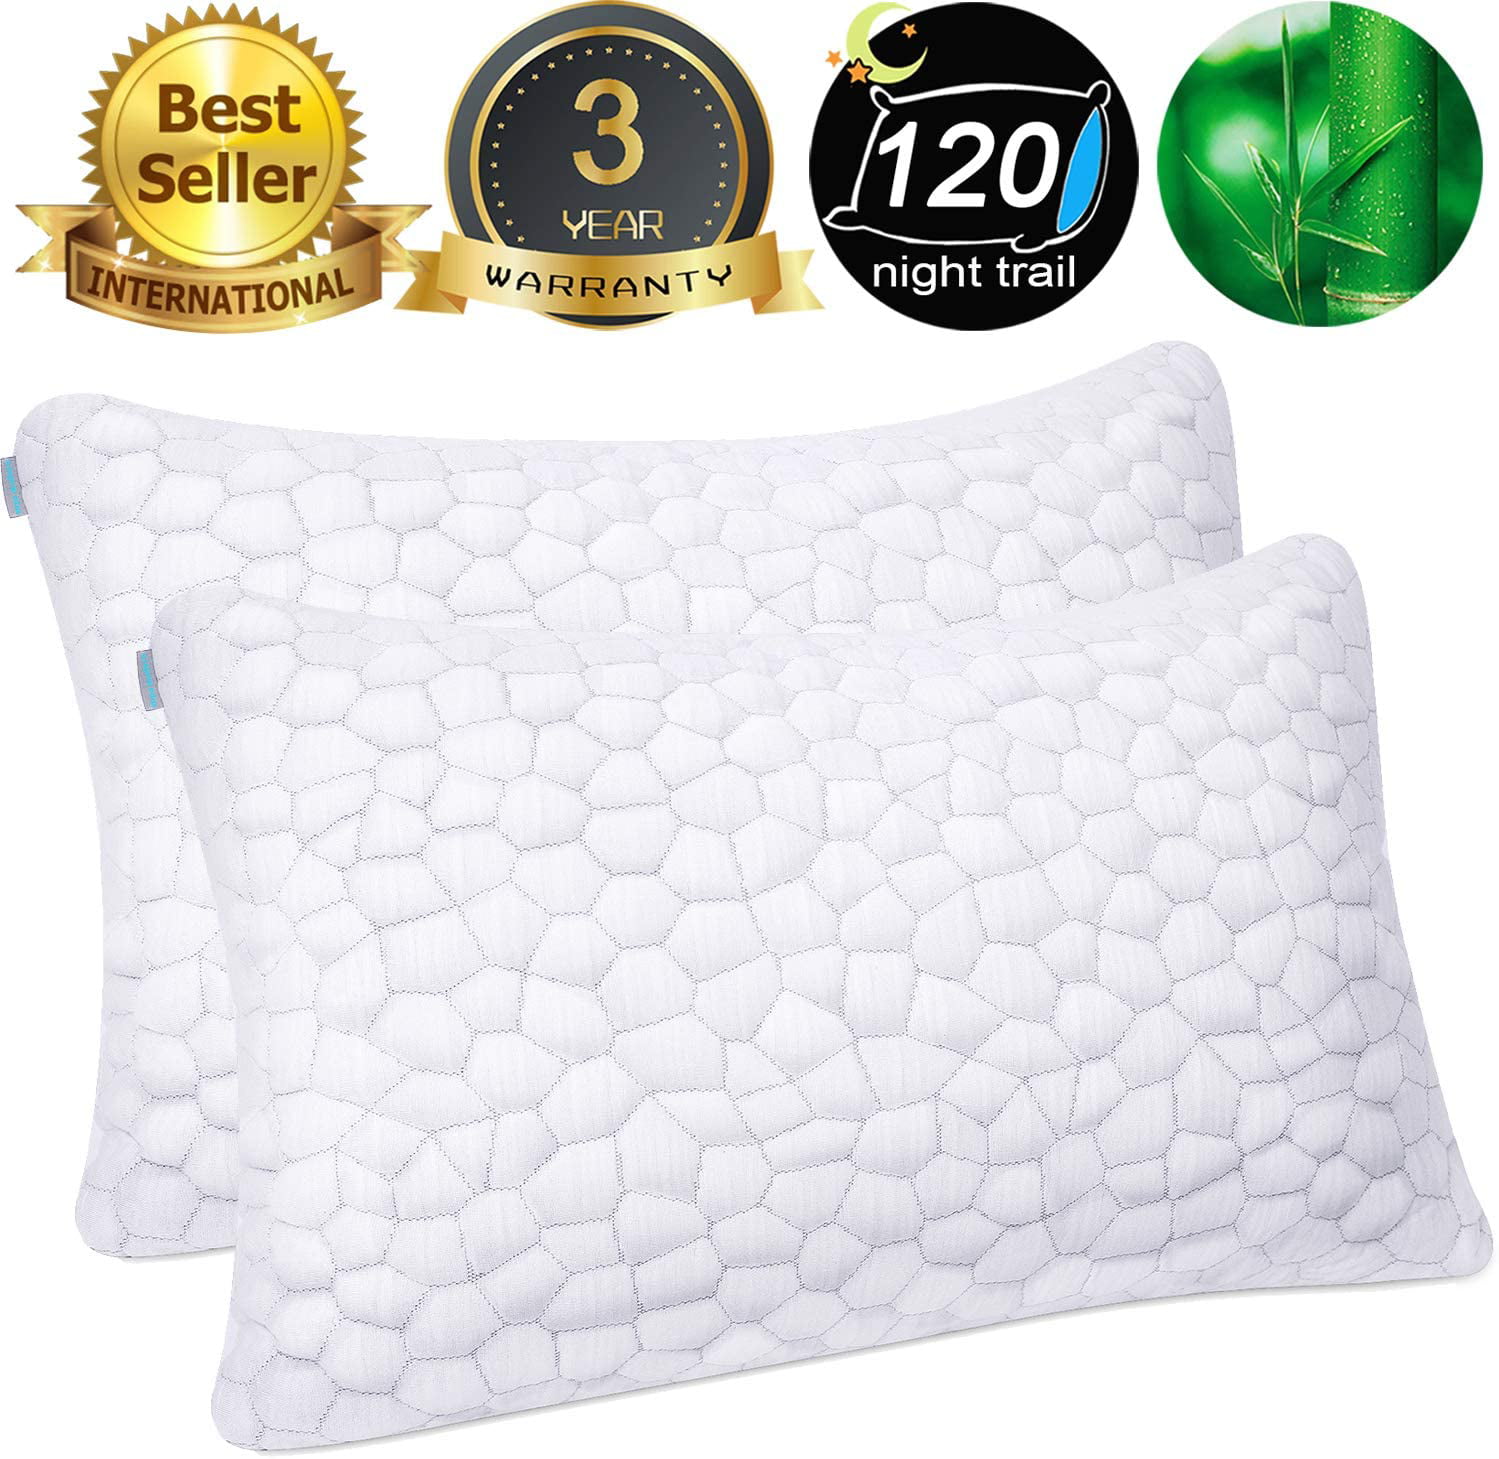 Comficlouds Cooling Bed Pillows for Sleeping Set of 2 Queen Bamboo Cooling Bed Pillow, White